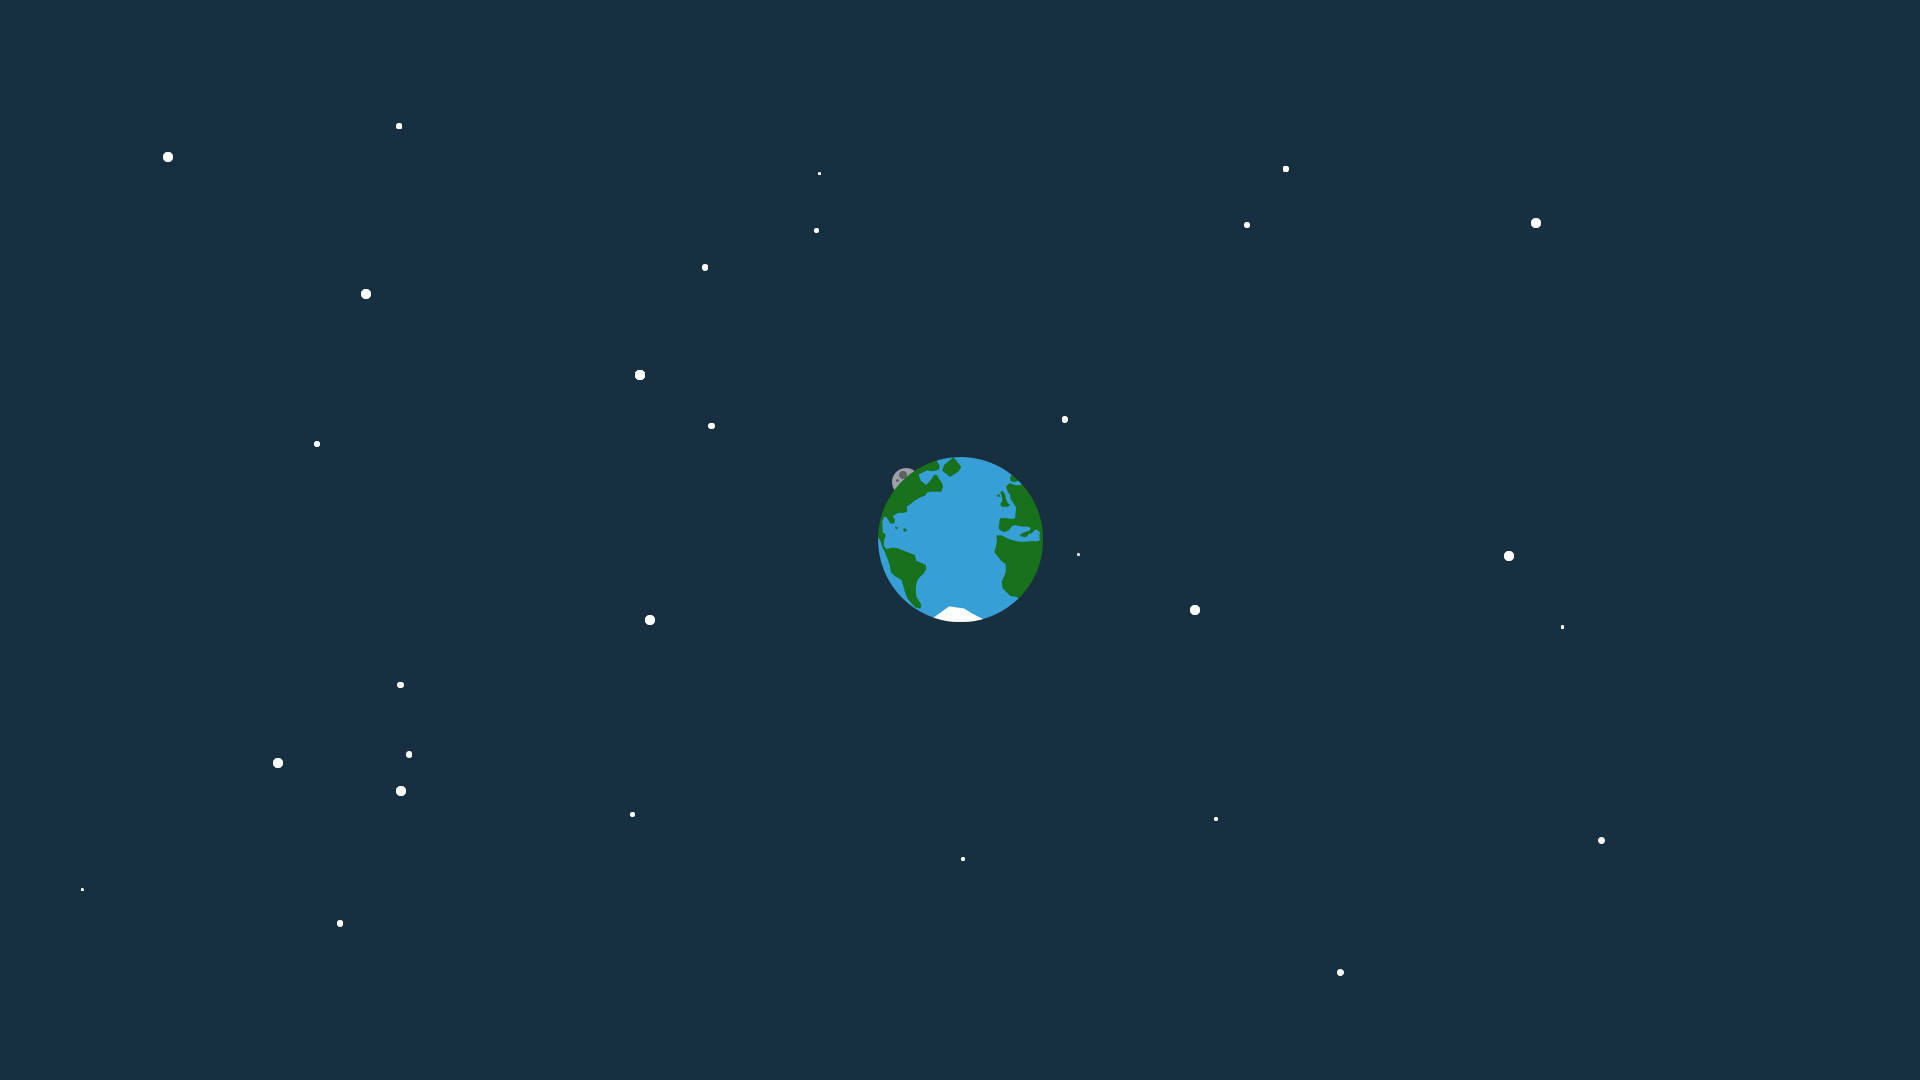 Hd Art Of The Earth Background